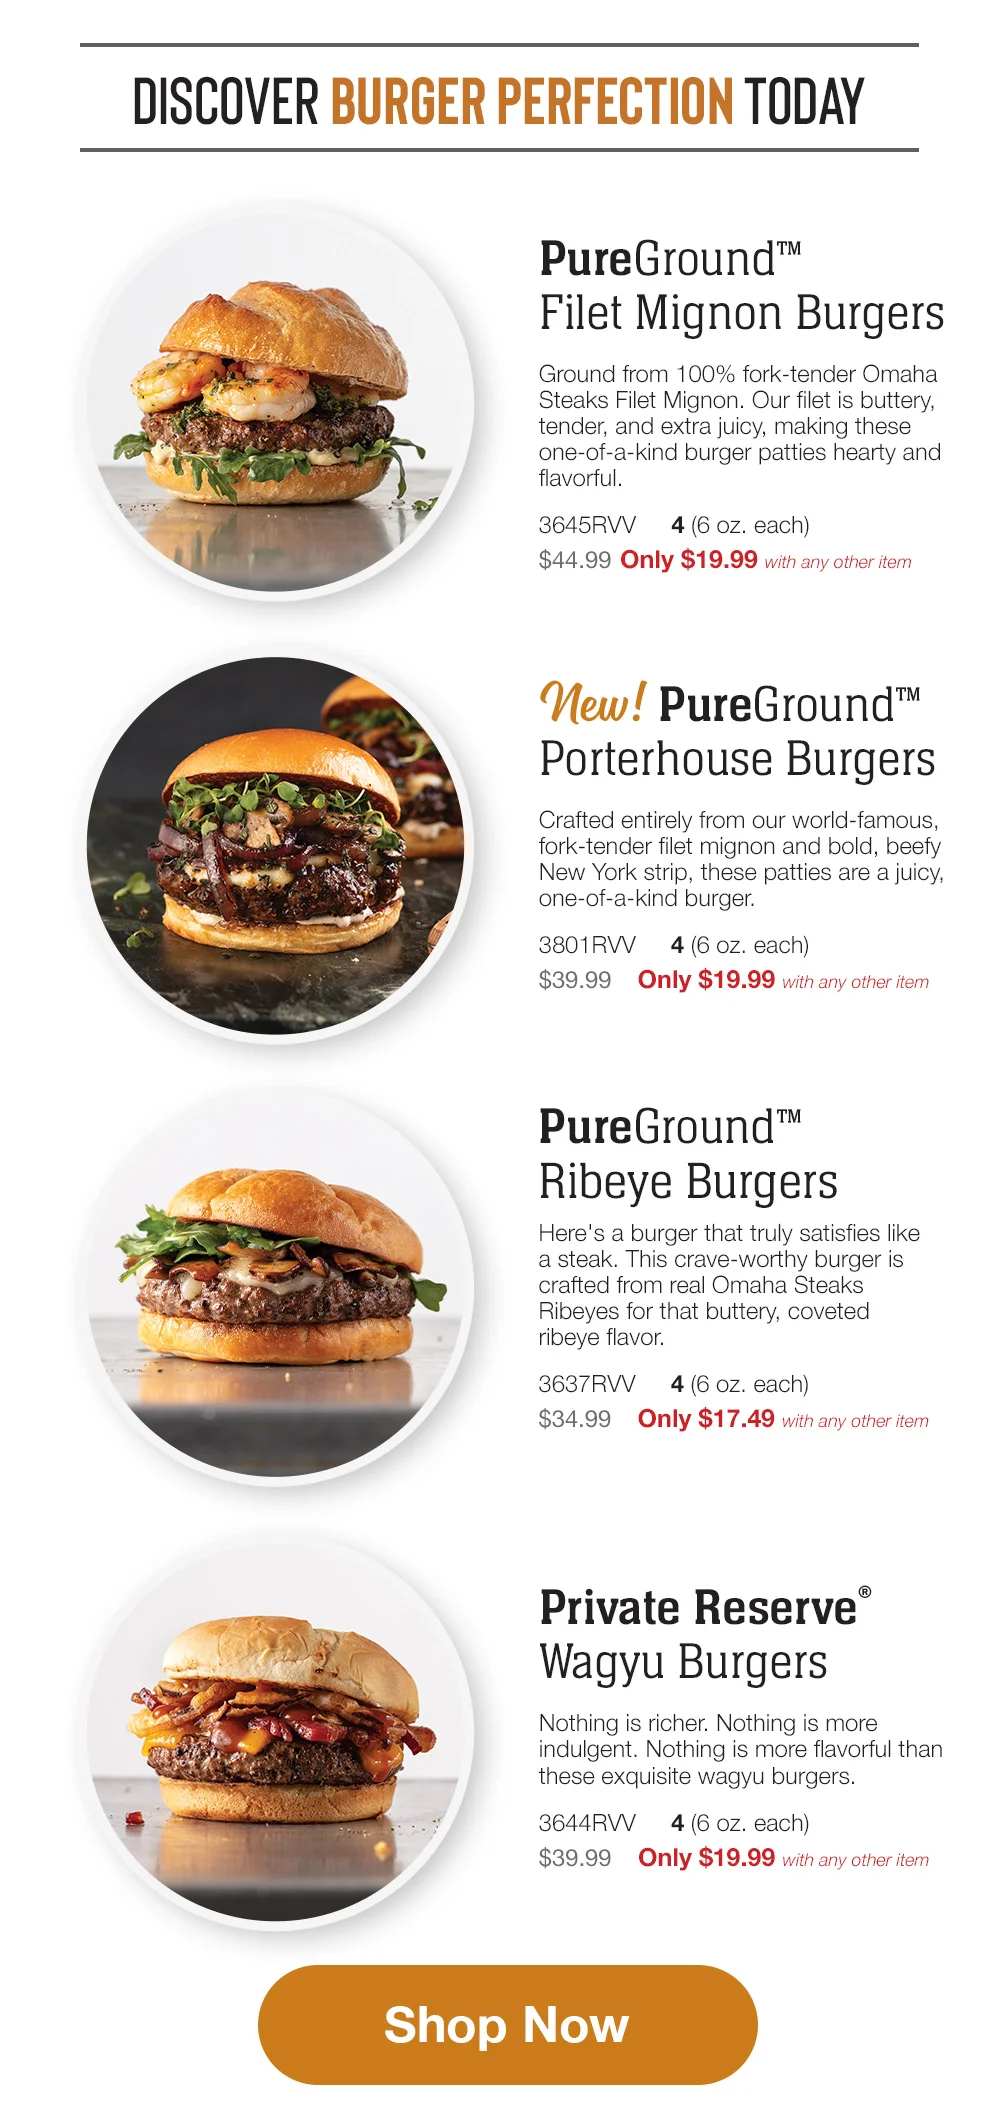 DISCOVER BURGER PERFECTION TODAY PureGround™™ Filet Mignon Burgers Ground from 100% fork-tender Omaha Steaks Filet Mignon. Our filet is buttery, tender, and extra juicy, making these one-of-a-kind burger patties hearty and flavorful. 3645RRV 4 (6 oz. each) \\$44.99 Only \\$19.99 with any other item New pureground Porterhouse Burgers Crafted entirely from our world-famous, fork-tender filet mignon and bold, beefy New York strip, these patties are a juicy, one-of-a-kind burger. 3801RRV \\$39.99 4 (6 oz. each) Only \\$19.99 with any other item PureGround™™ Ribeye Burgers Here's a burger that truly satisfies like a steak. This crave-worthy burger is crafted from real Omaha Steaks Ribeyes for that buttery, coveted ribeye flavor. 3637RRV 4(6 oz. each) \\$34.99 Only \\$17.49 with any other item Private Reserve® Wagyu Burgers Nothing is richer. Nothing is more indulgent. Nothing is more flavorful than these exquisite wagyu burgers. 3644RRV 4 (6 oz. each) \\$39.99 Only \\$19.99 with any other item Shop Now 